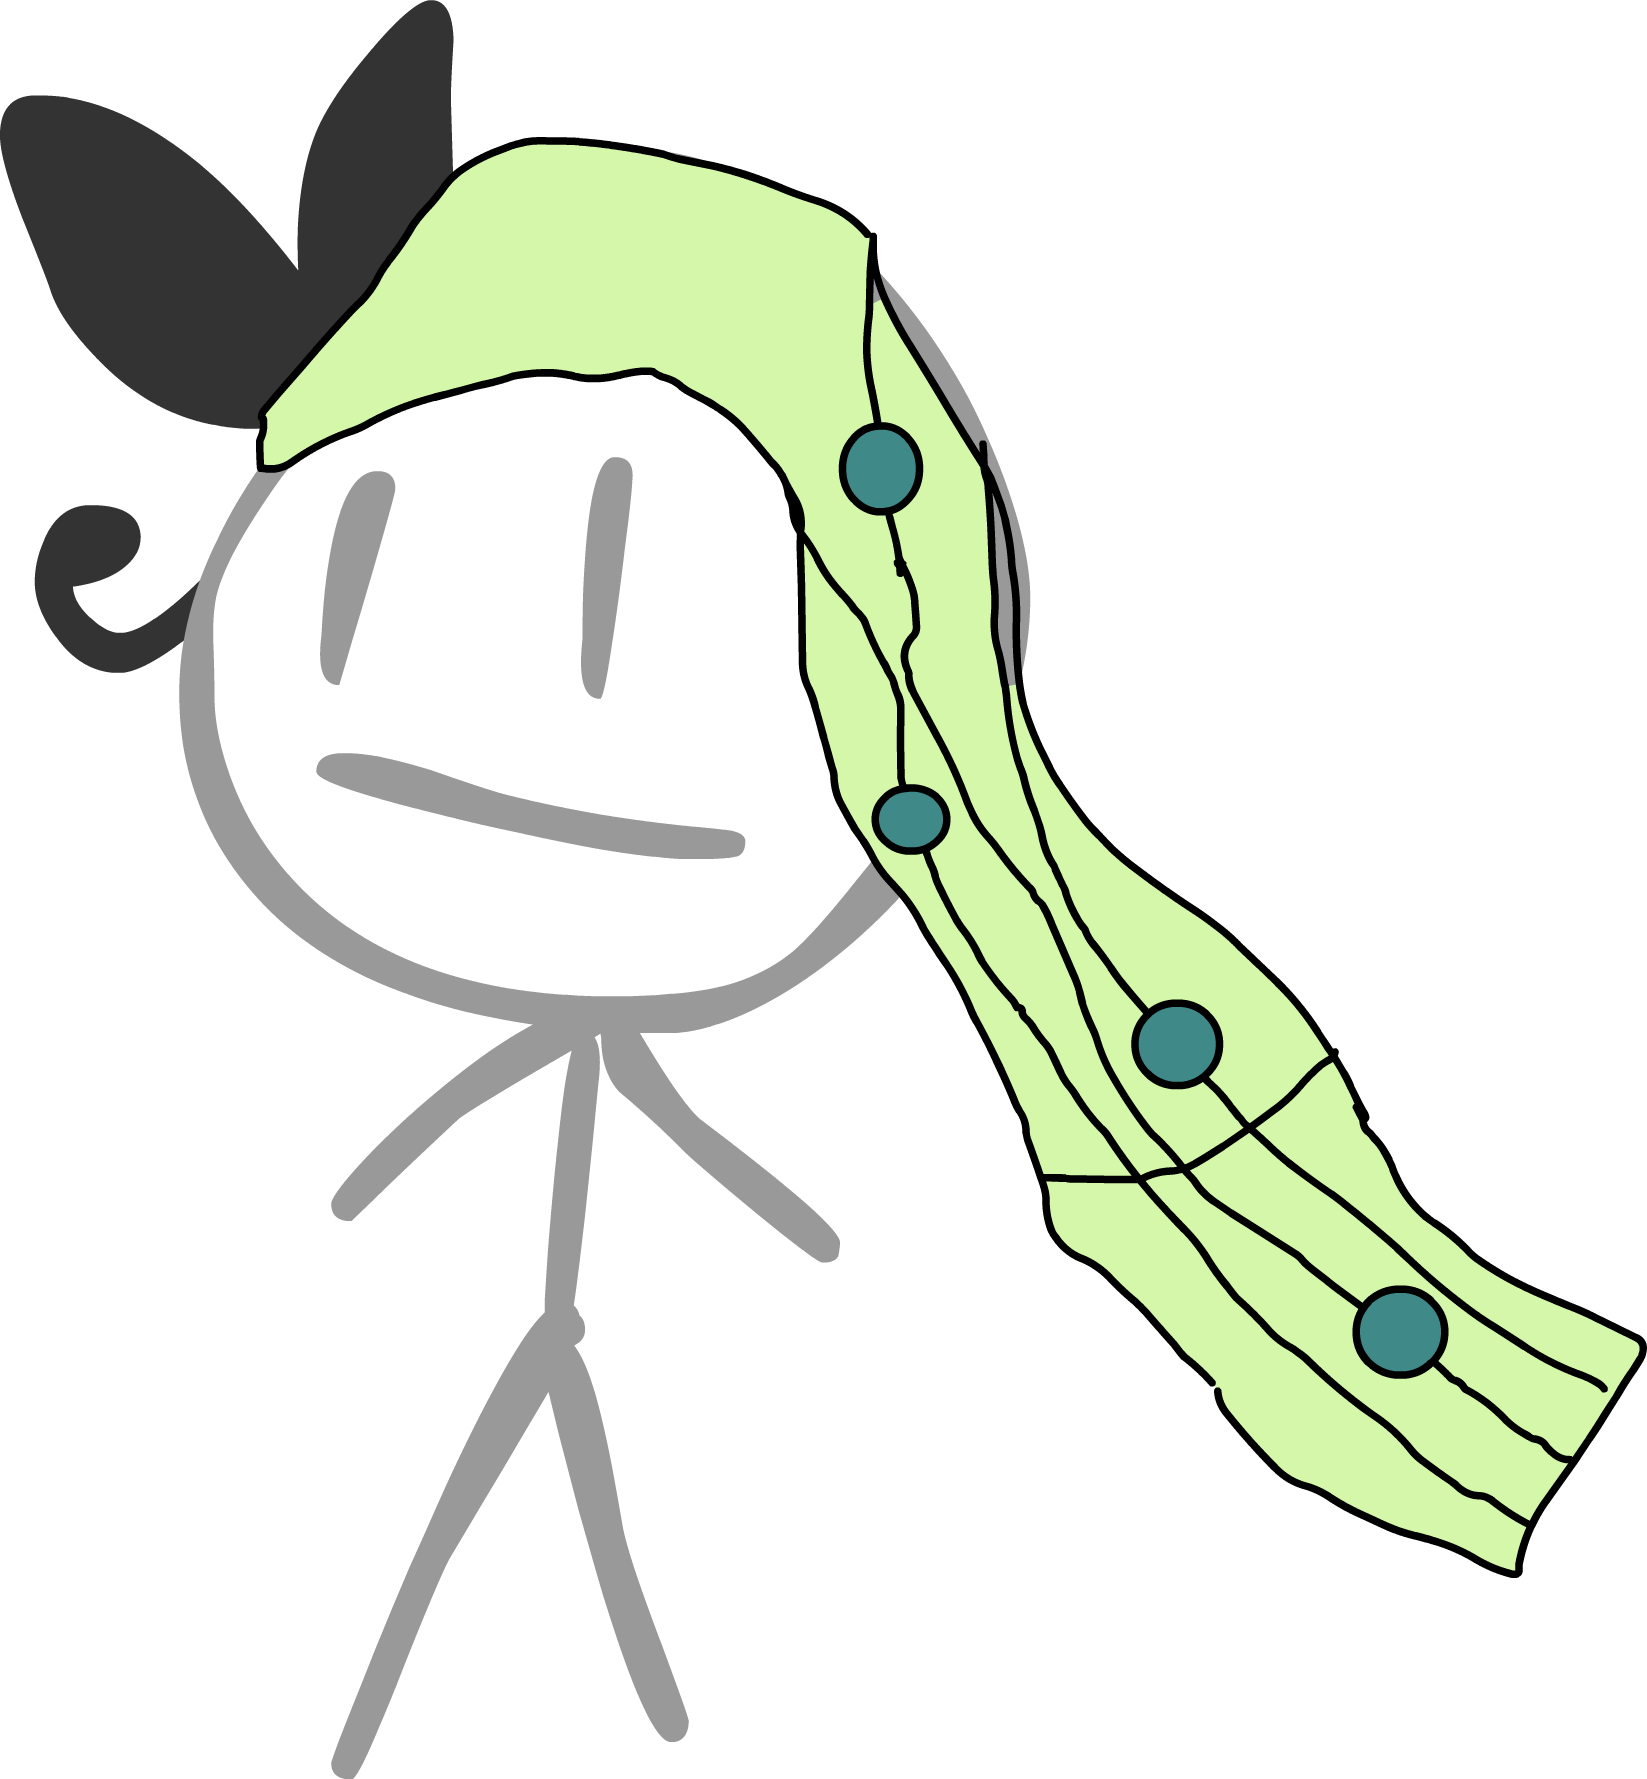 Download Bfdi David PNG Image with No Background - PNGkey.com